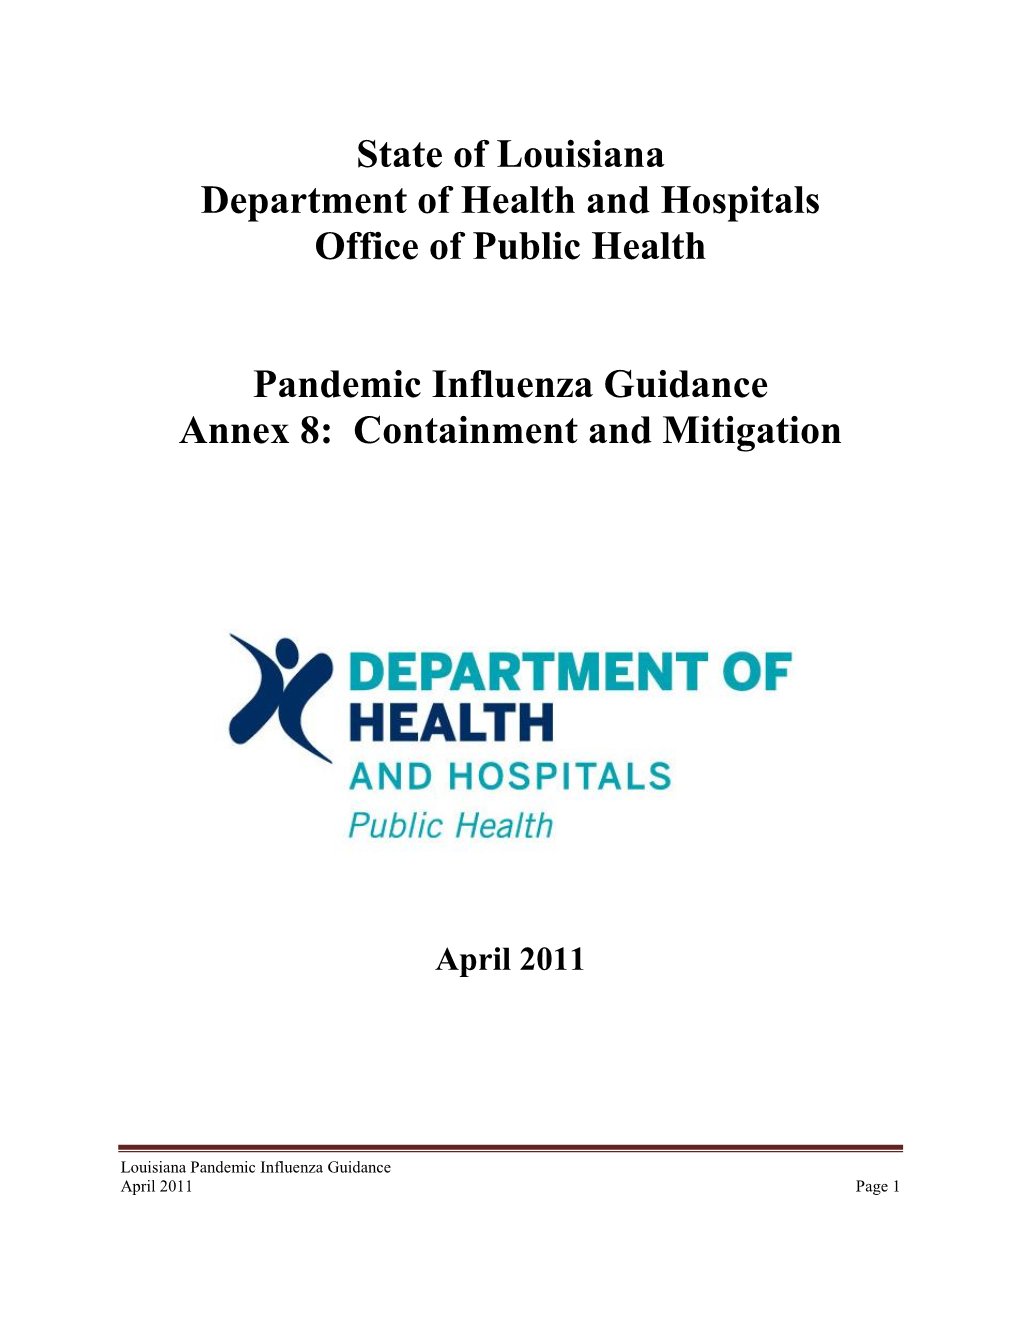 2011 Pandemic Influenza Containment and Mitigation